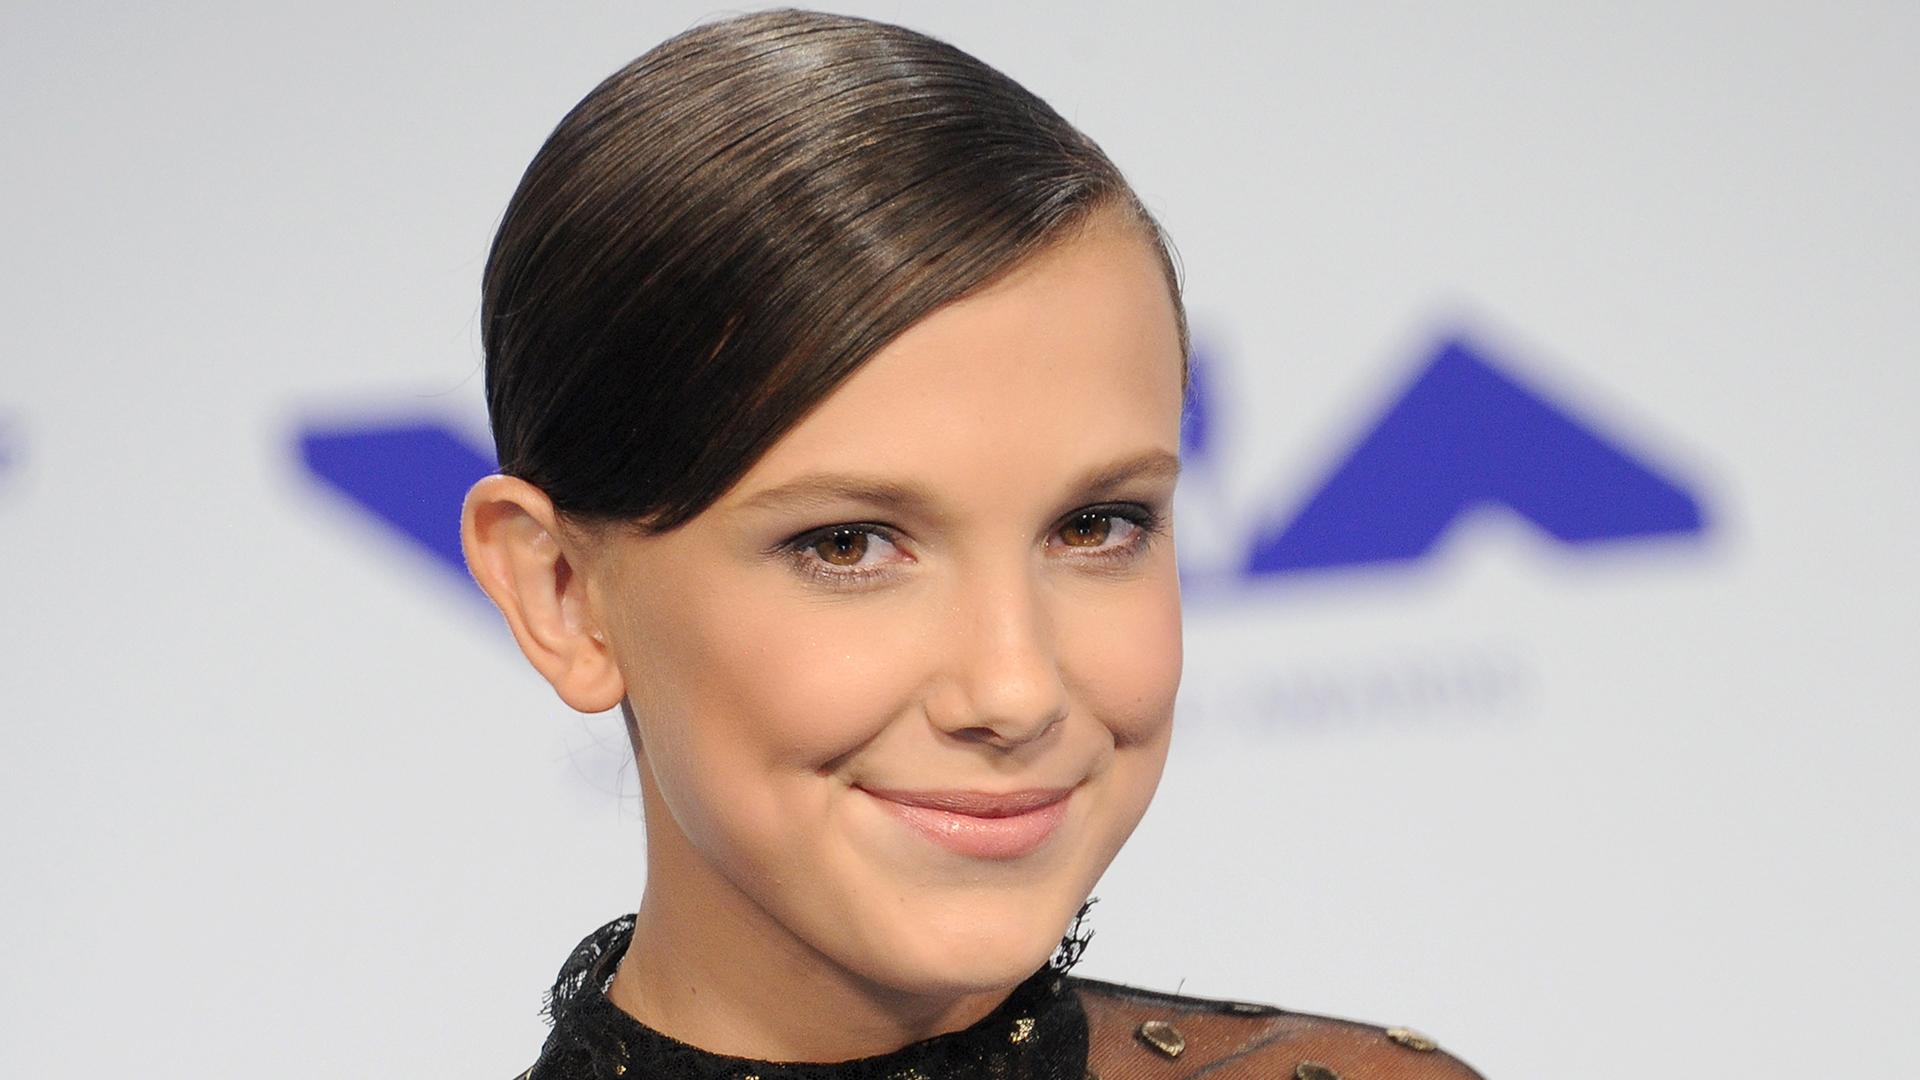 Stranger Things' Millie Bobby Brown opens up about being deaf in one ear